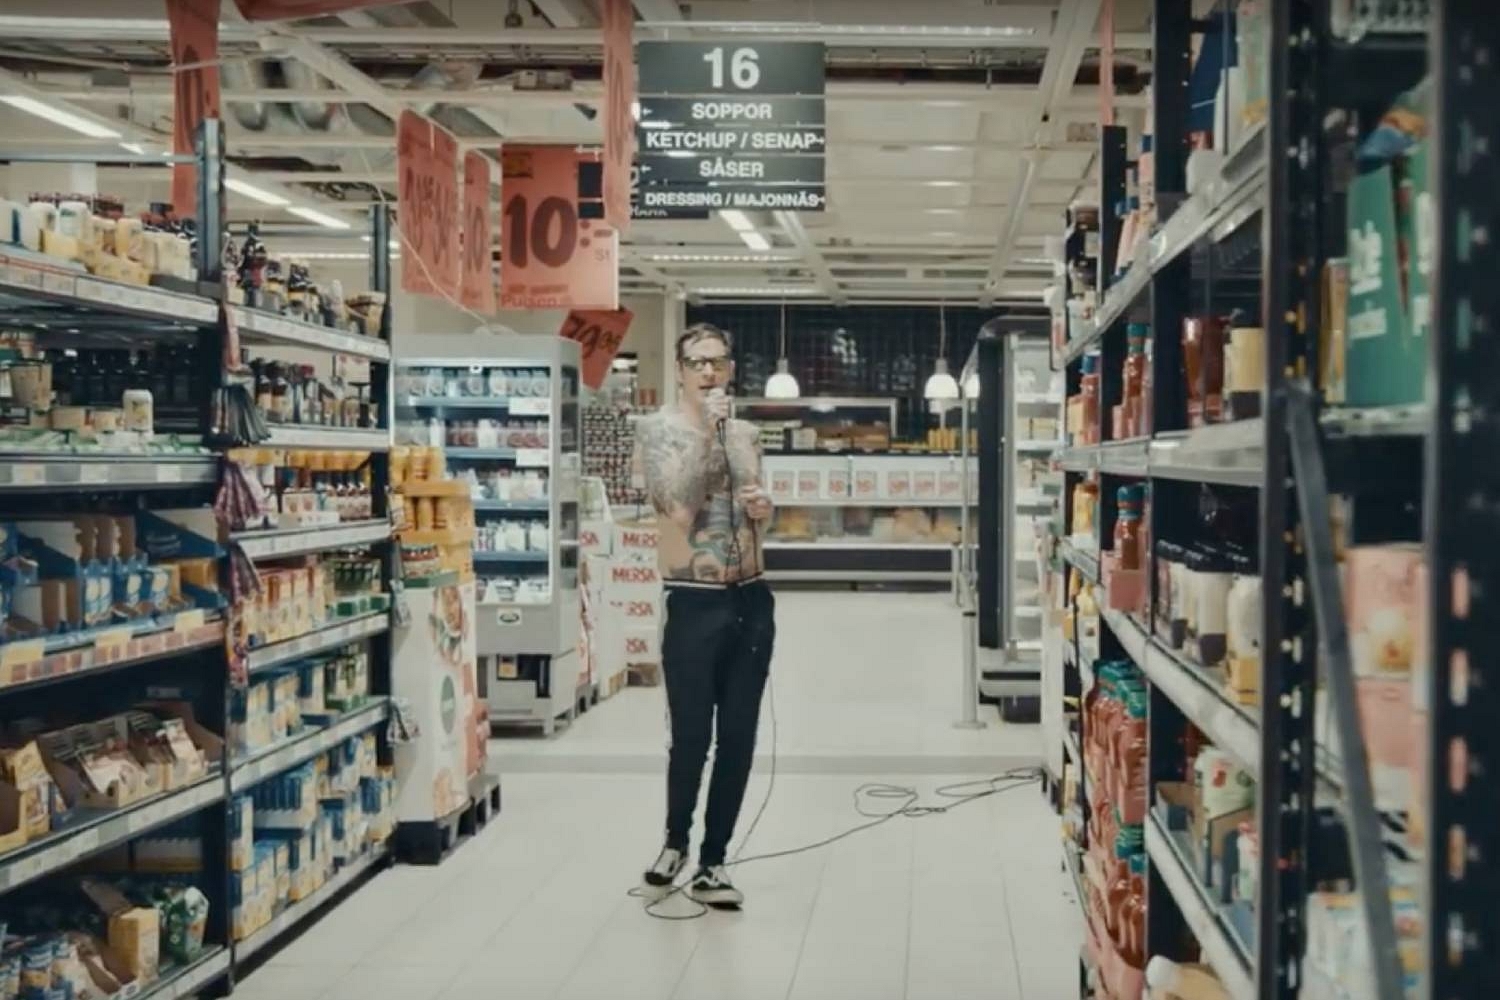 Viagra Boys head to the supermarket in new video for ‘Just Like You’